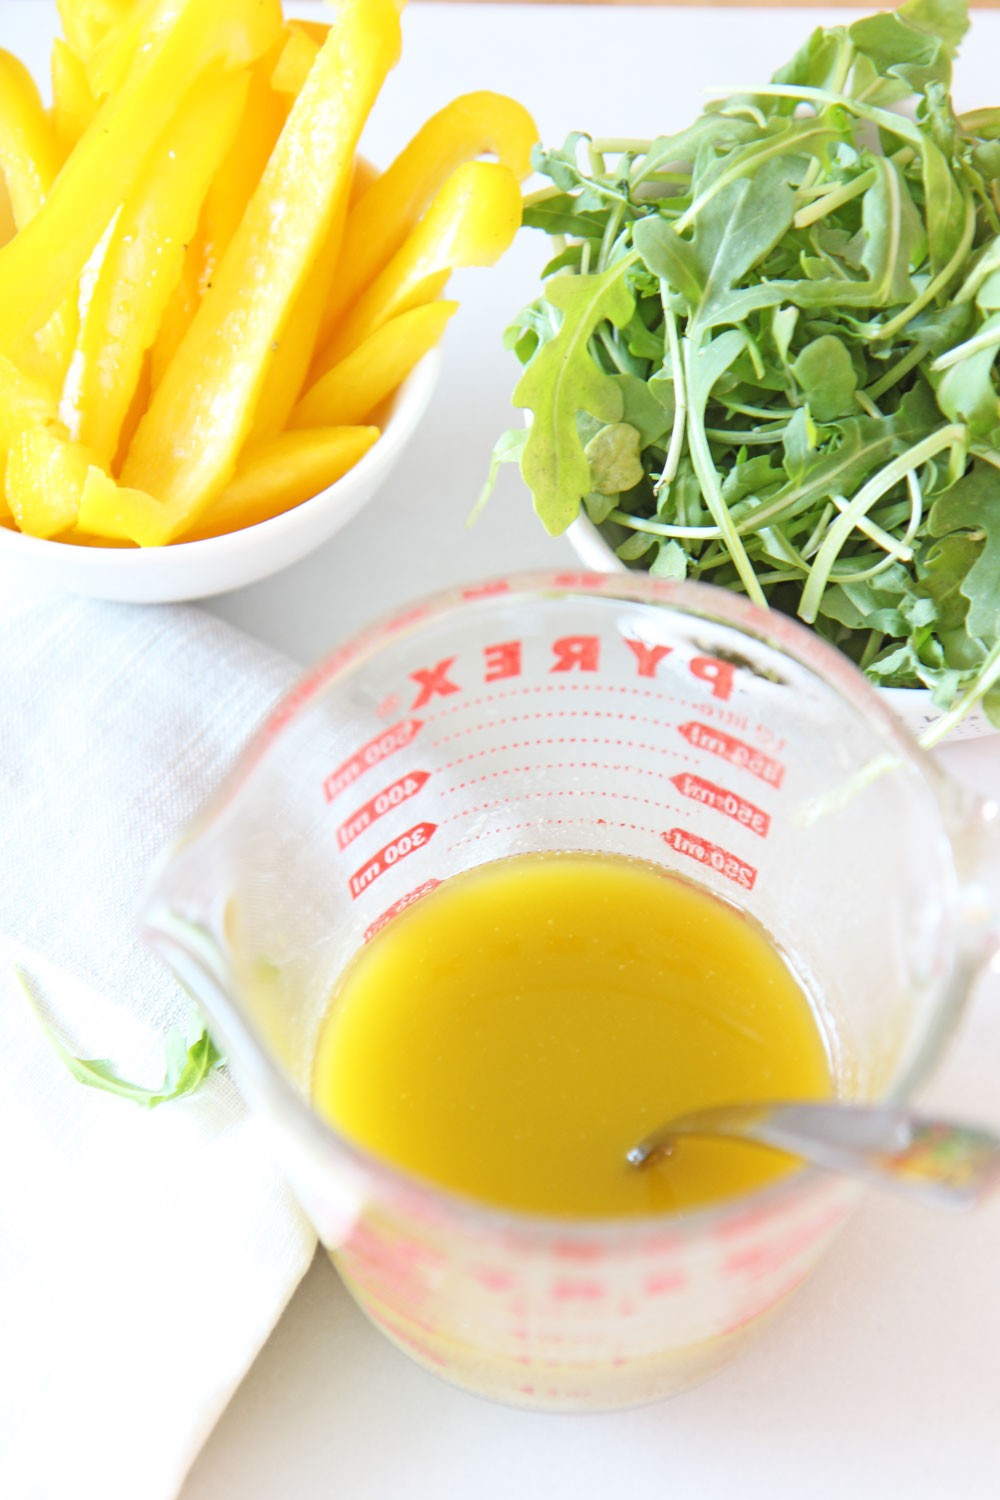 Easy Apple Cider Vinaigrette. Happy easy bright salad dressing is minutes away. You can use this recipe to marinade chicken, steak, or veggies. Hope this salad dressing recipe is your new go to! Happy Cooking! #applecider #saladdressing